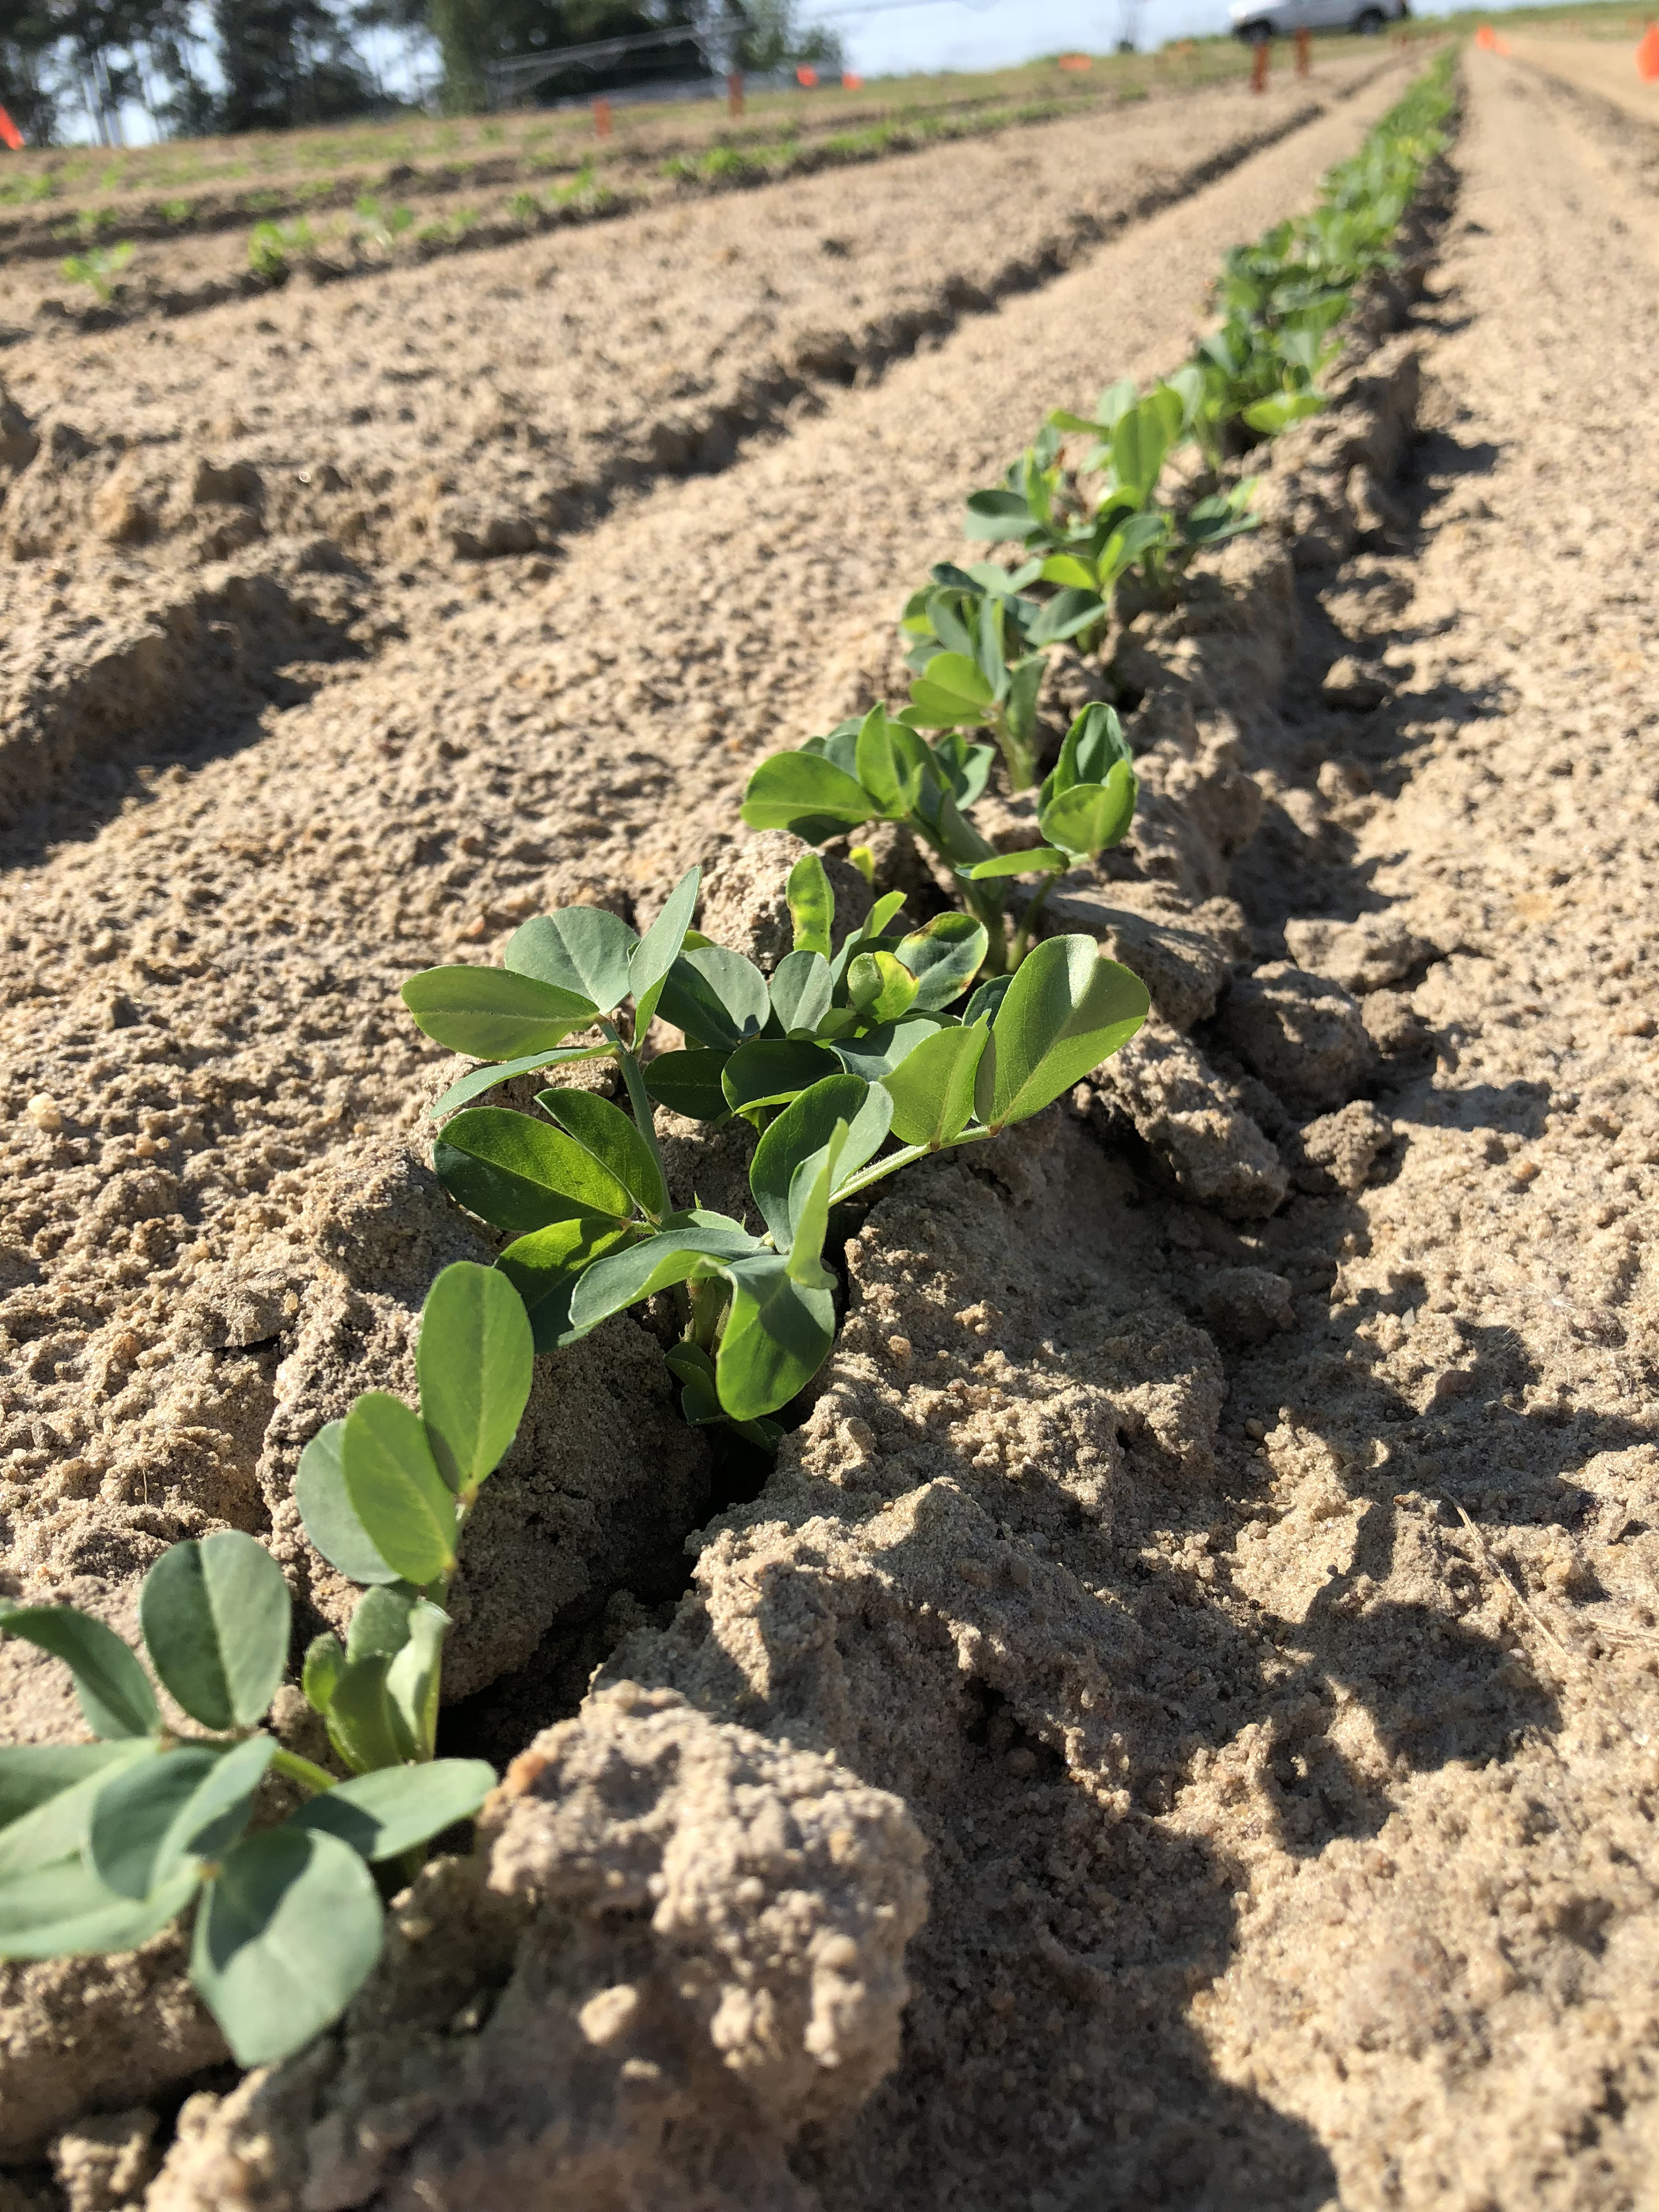 soil temperature is key to planting peanuts | caes newswire